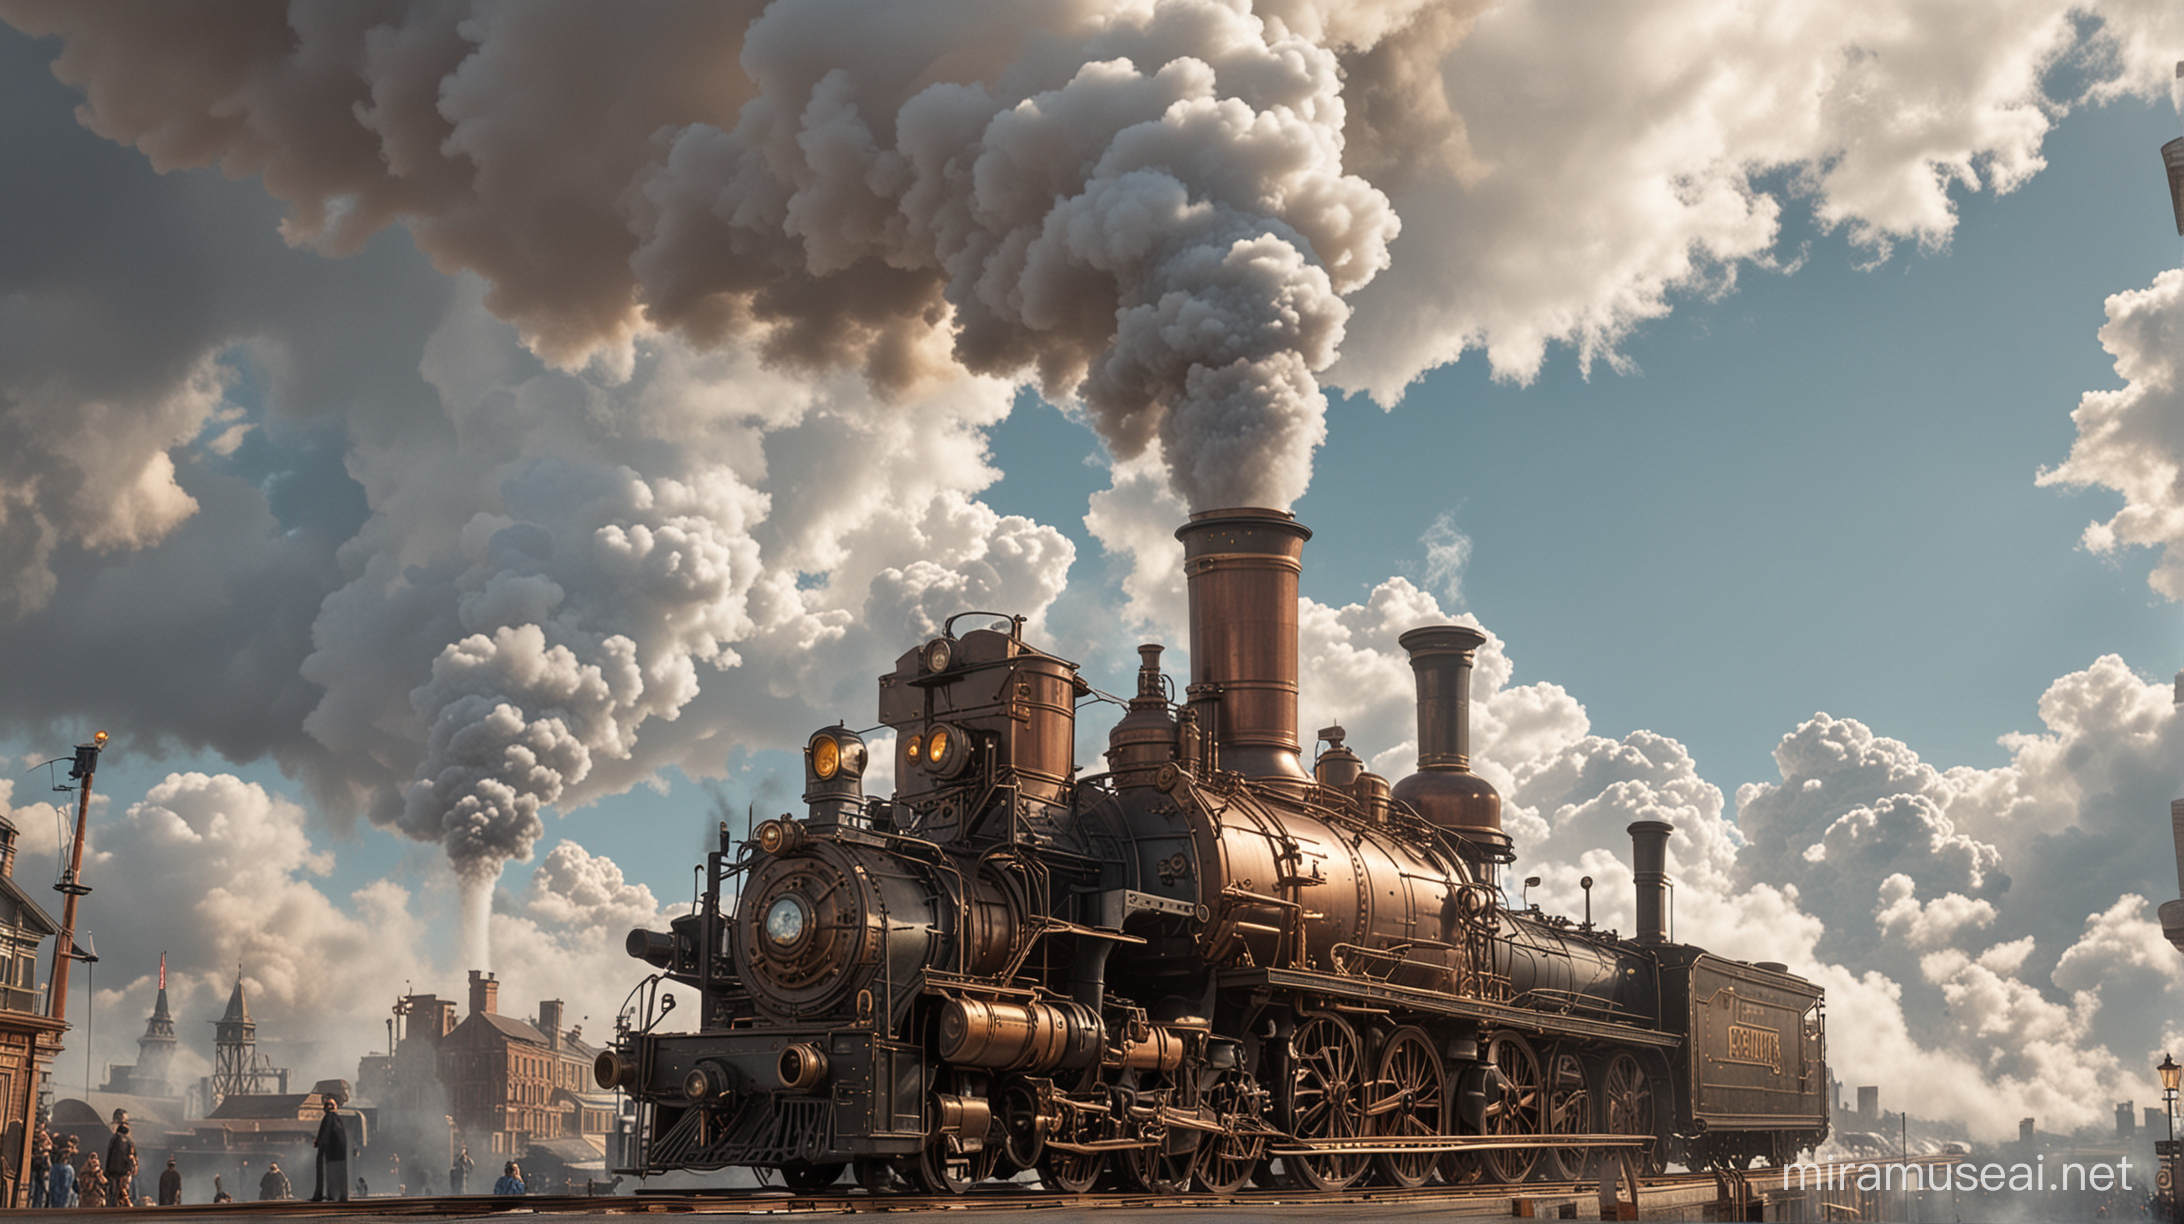 Steamy Steampunk City Envisioning Copper Gold and Brass Engines Amidst Clouds